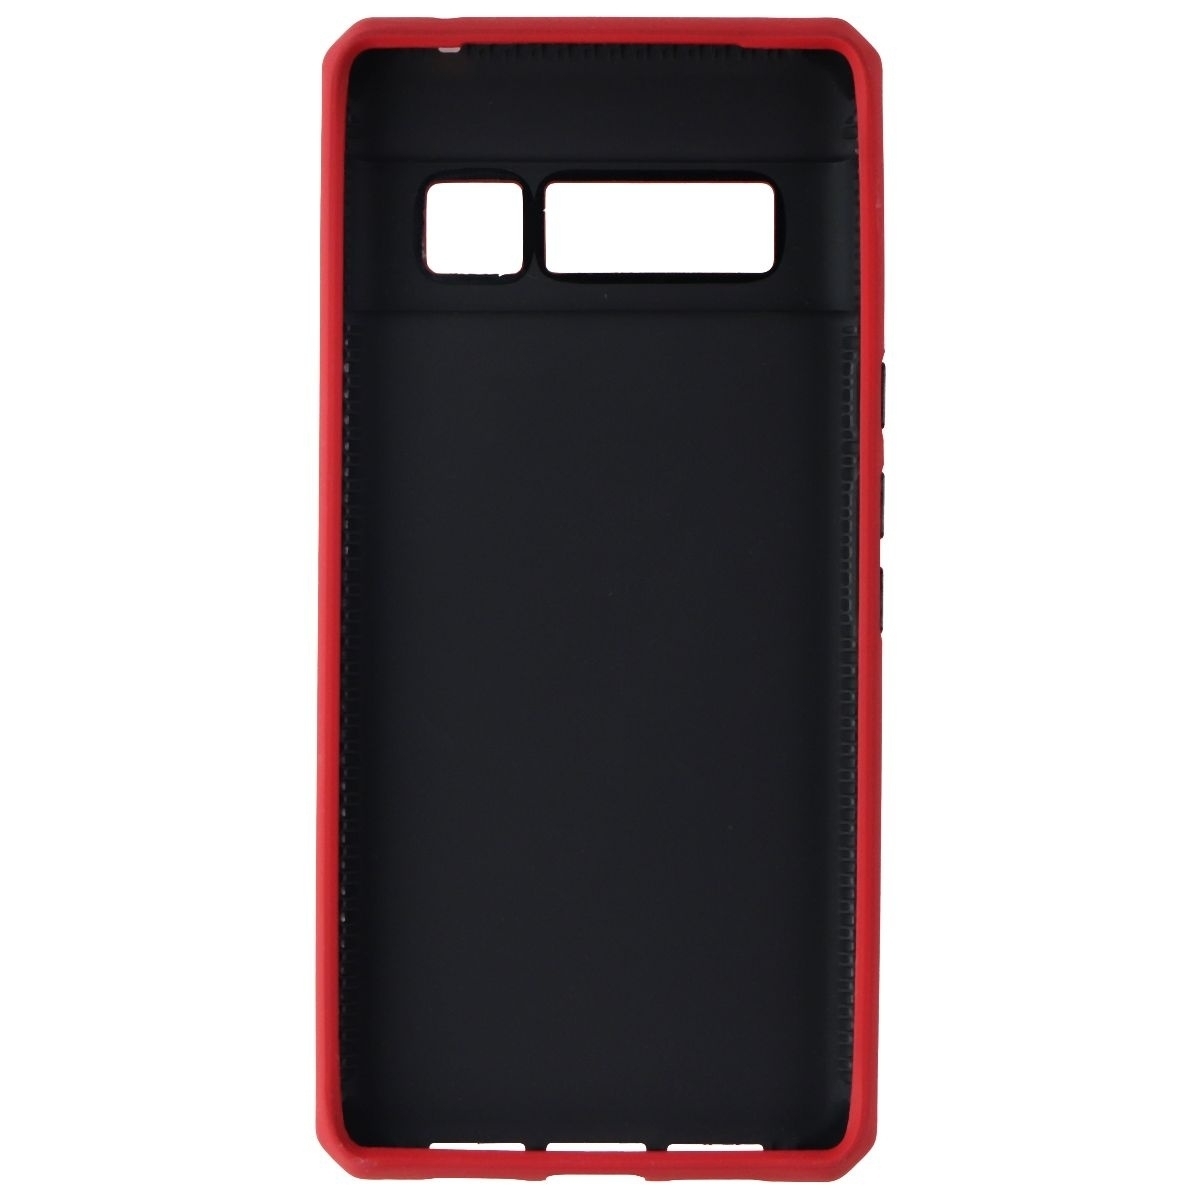 ITSKINS Spectrum Silk Protective Phone Case For Google Pixel 6 Pro - Chili Red